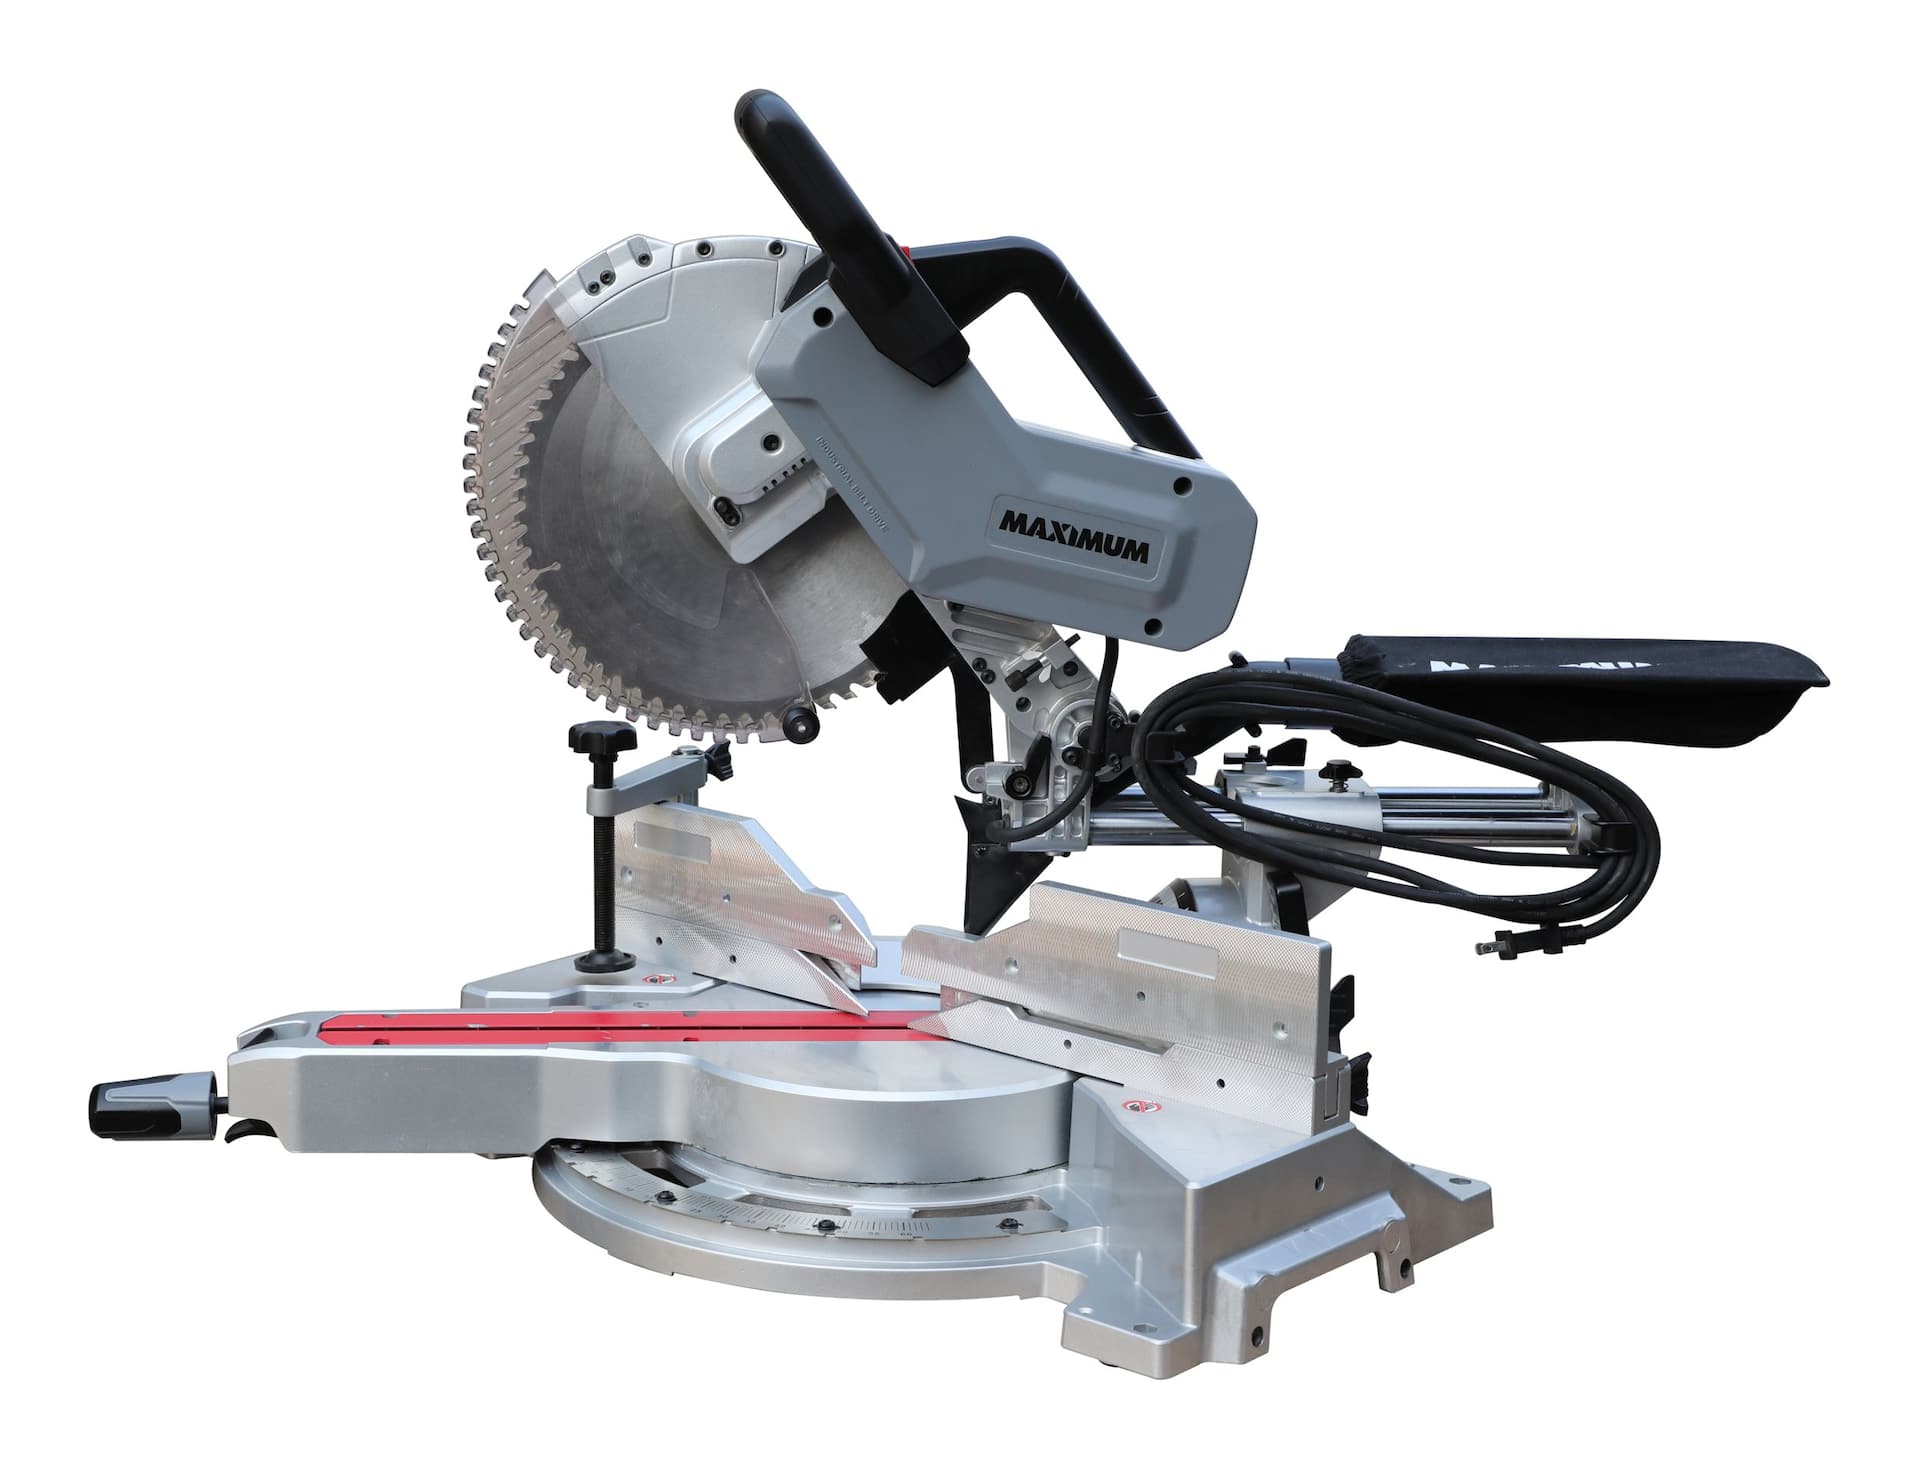 MAXIMUM 15 Amp Corded Dual-Bevel Sliding Mitre Saw, 12-in Canadian Tire